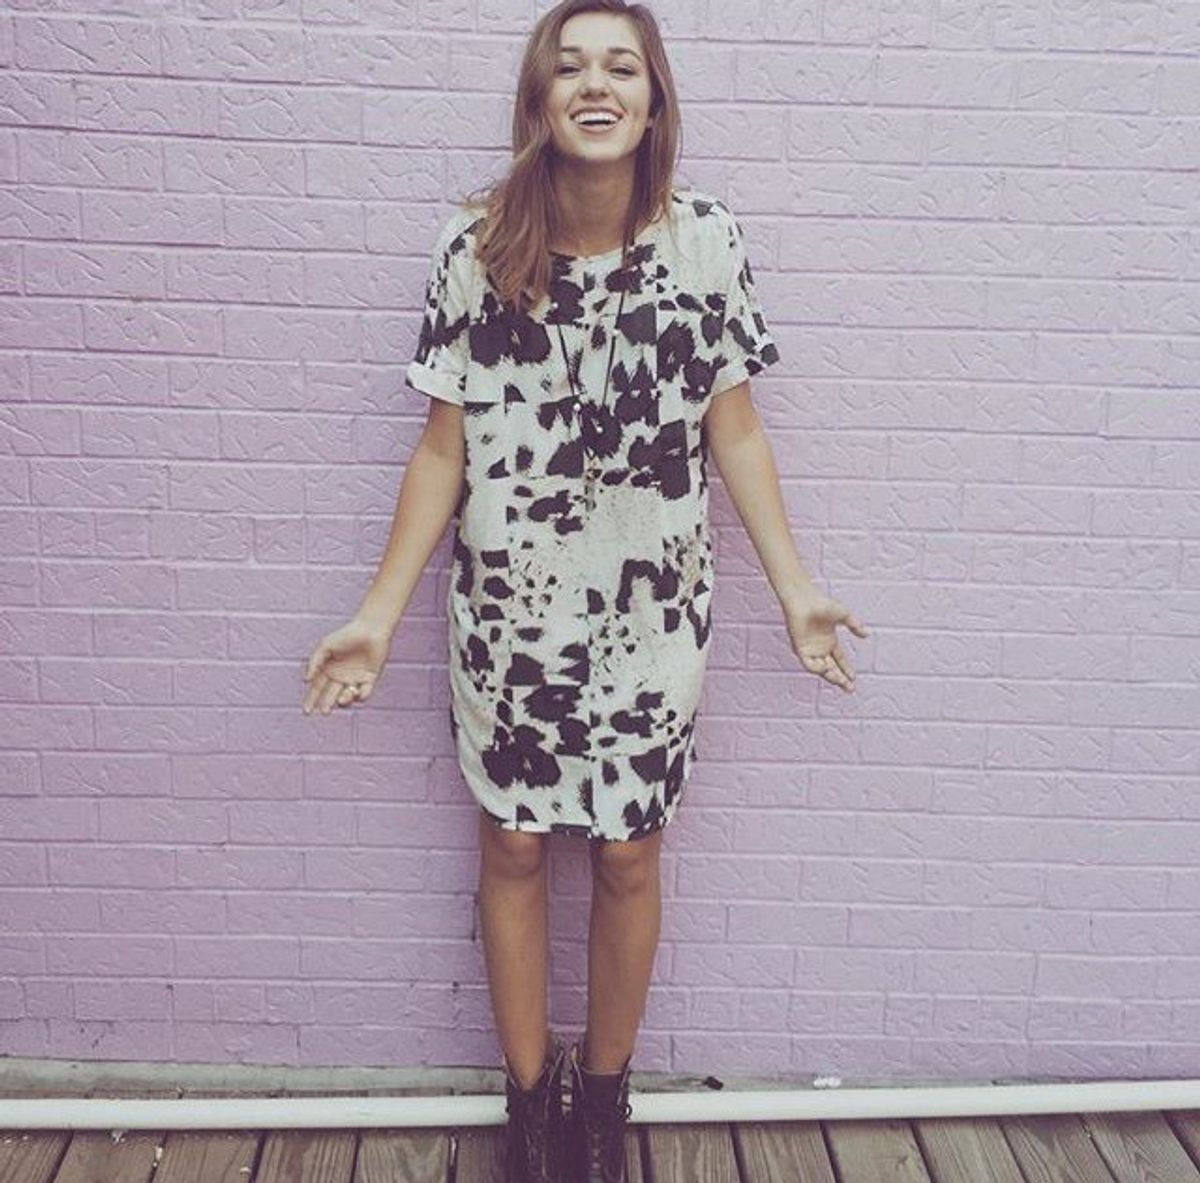 Why Sadie Robertson Should Be Every Girl's Role Model